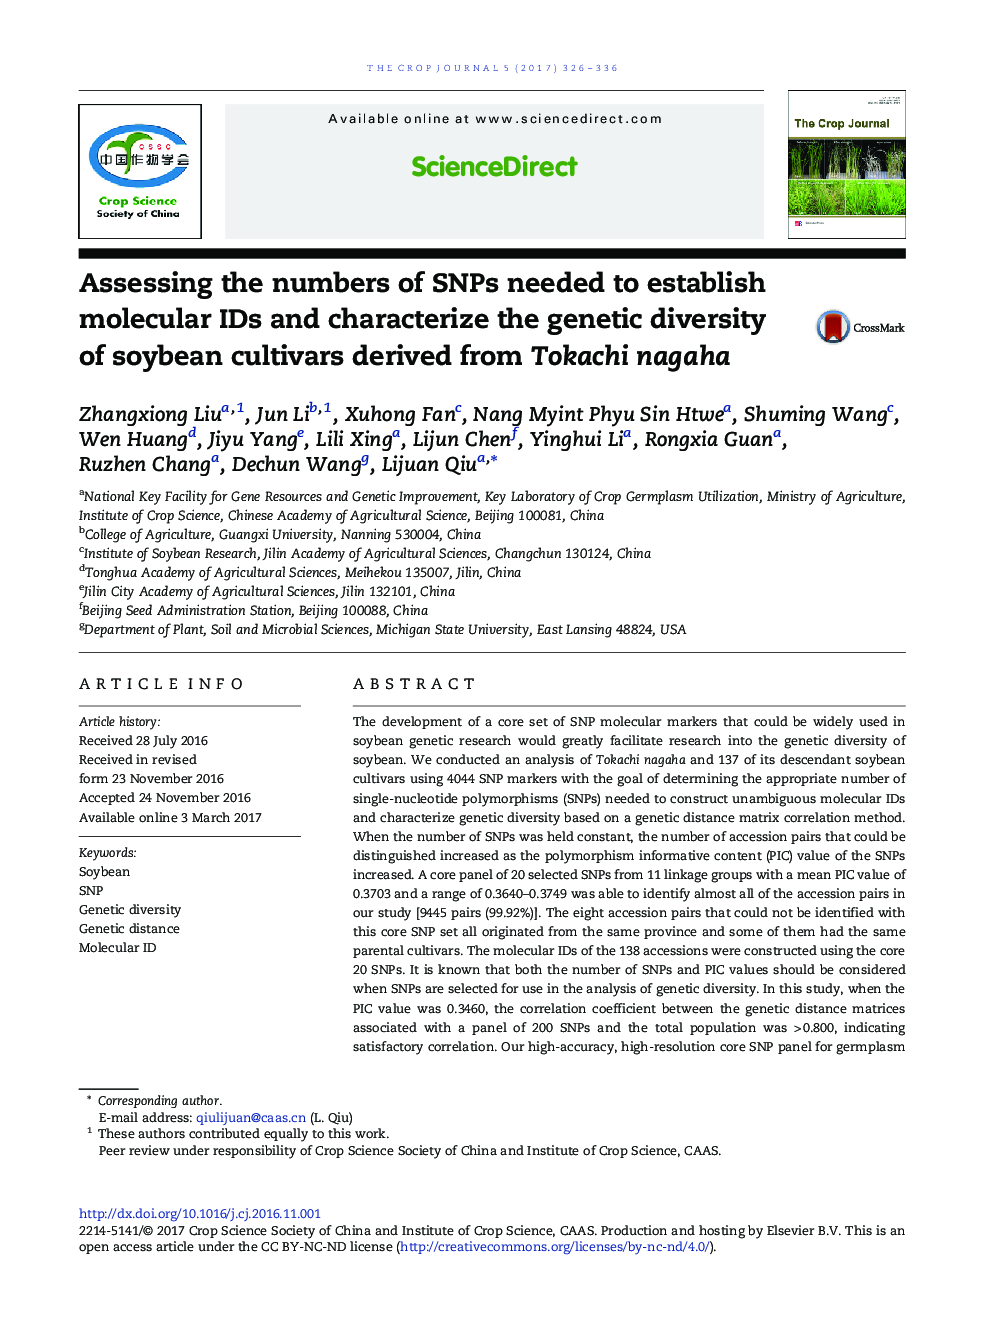 Assessing the numbers of SNPs needed to establish molecular IDs and characterize the genetic diversity of soybean cultivars derived from Tokachi nagaha